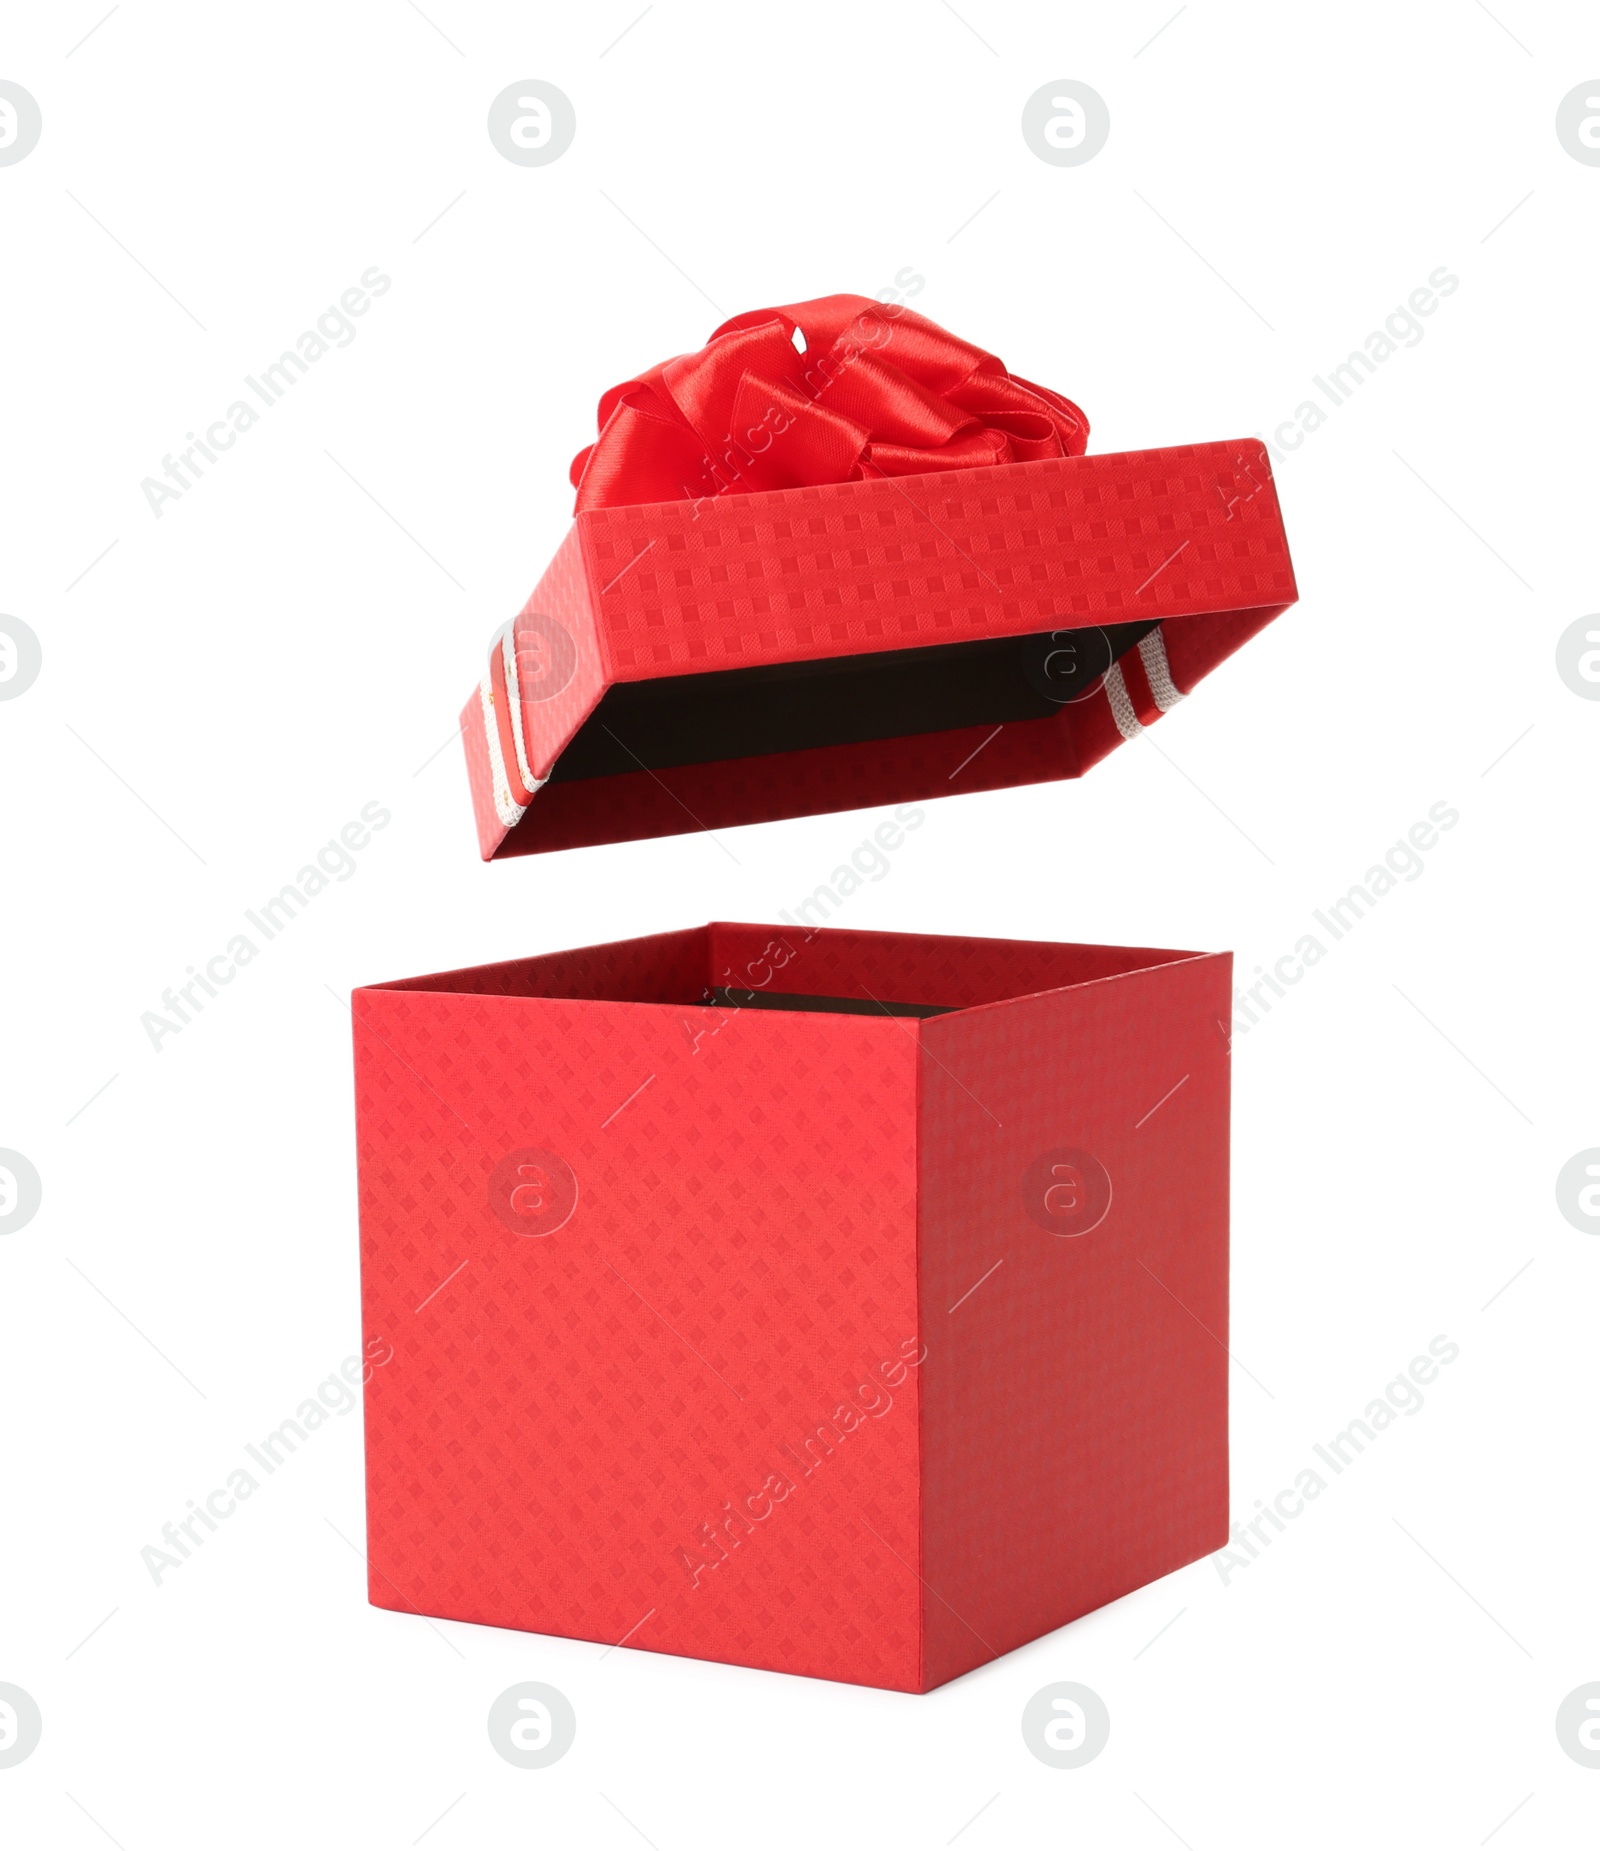 Photo of Red gift box and lid with bow on white background